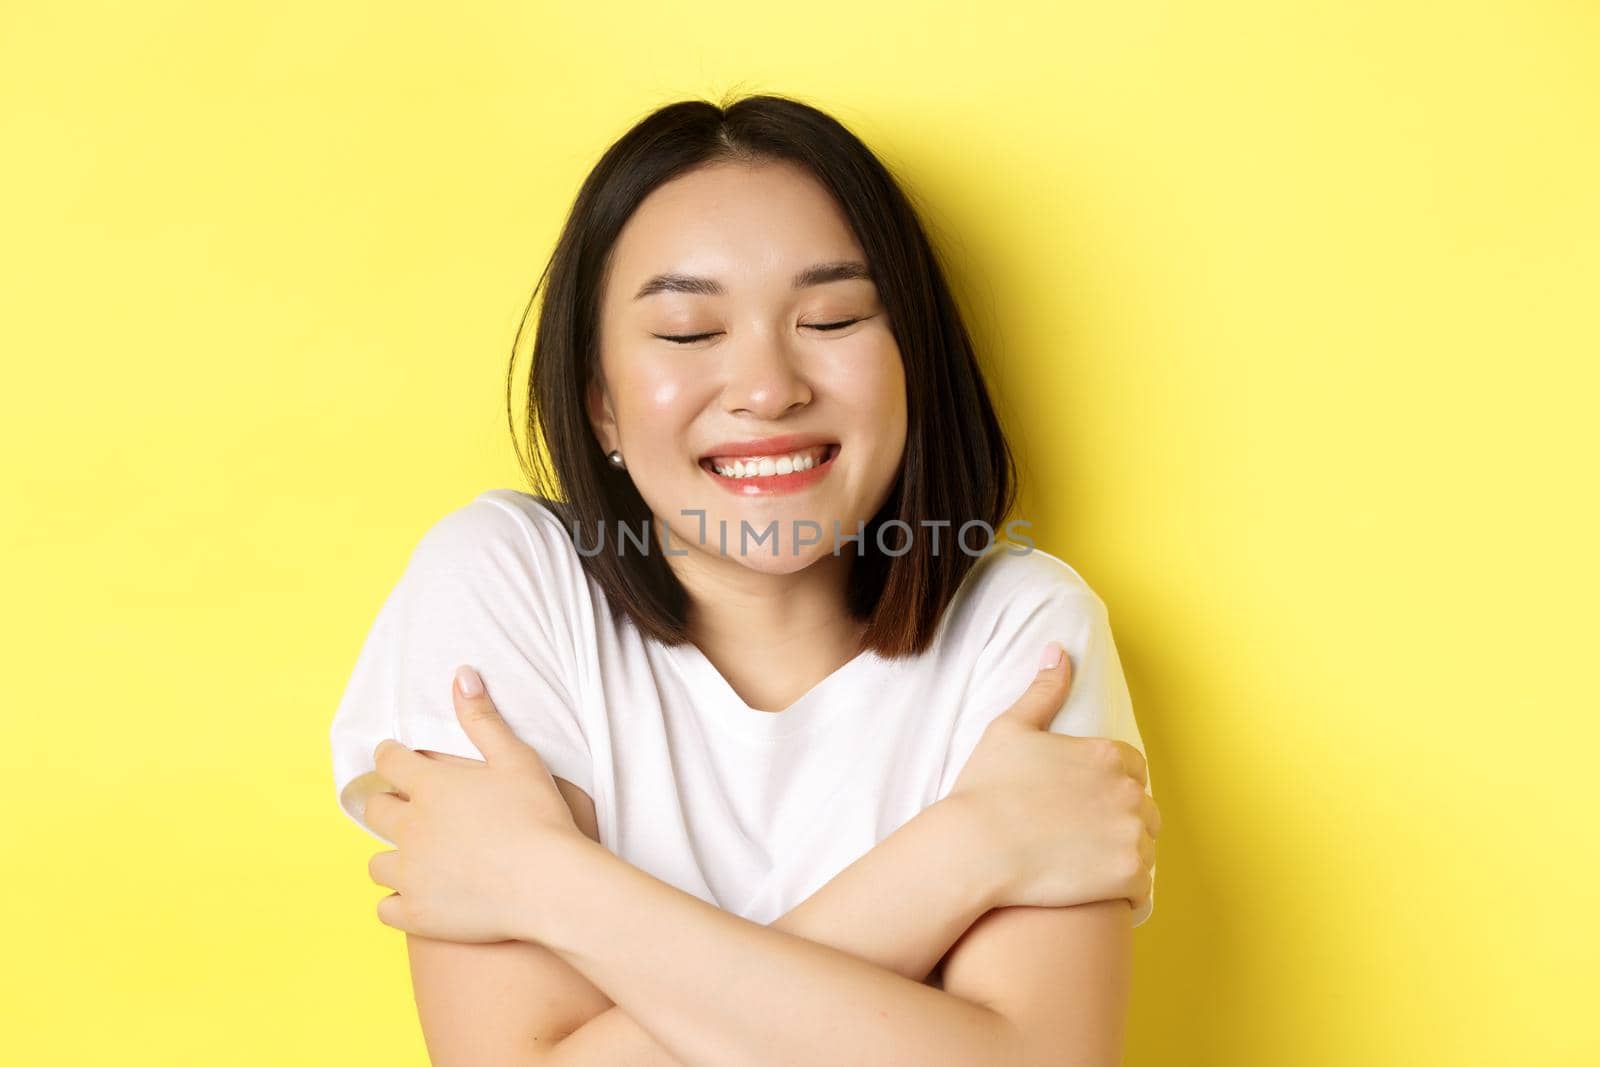 Close up of romantic asian girl hugging herself and dreaming, close eyes and smile while imaging something tender, standing over yellow background.